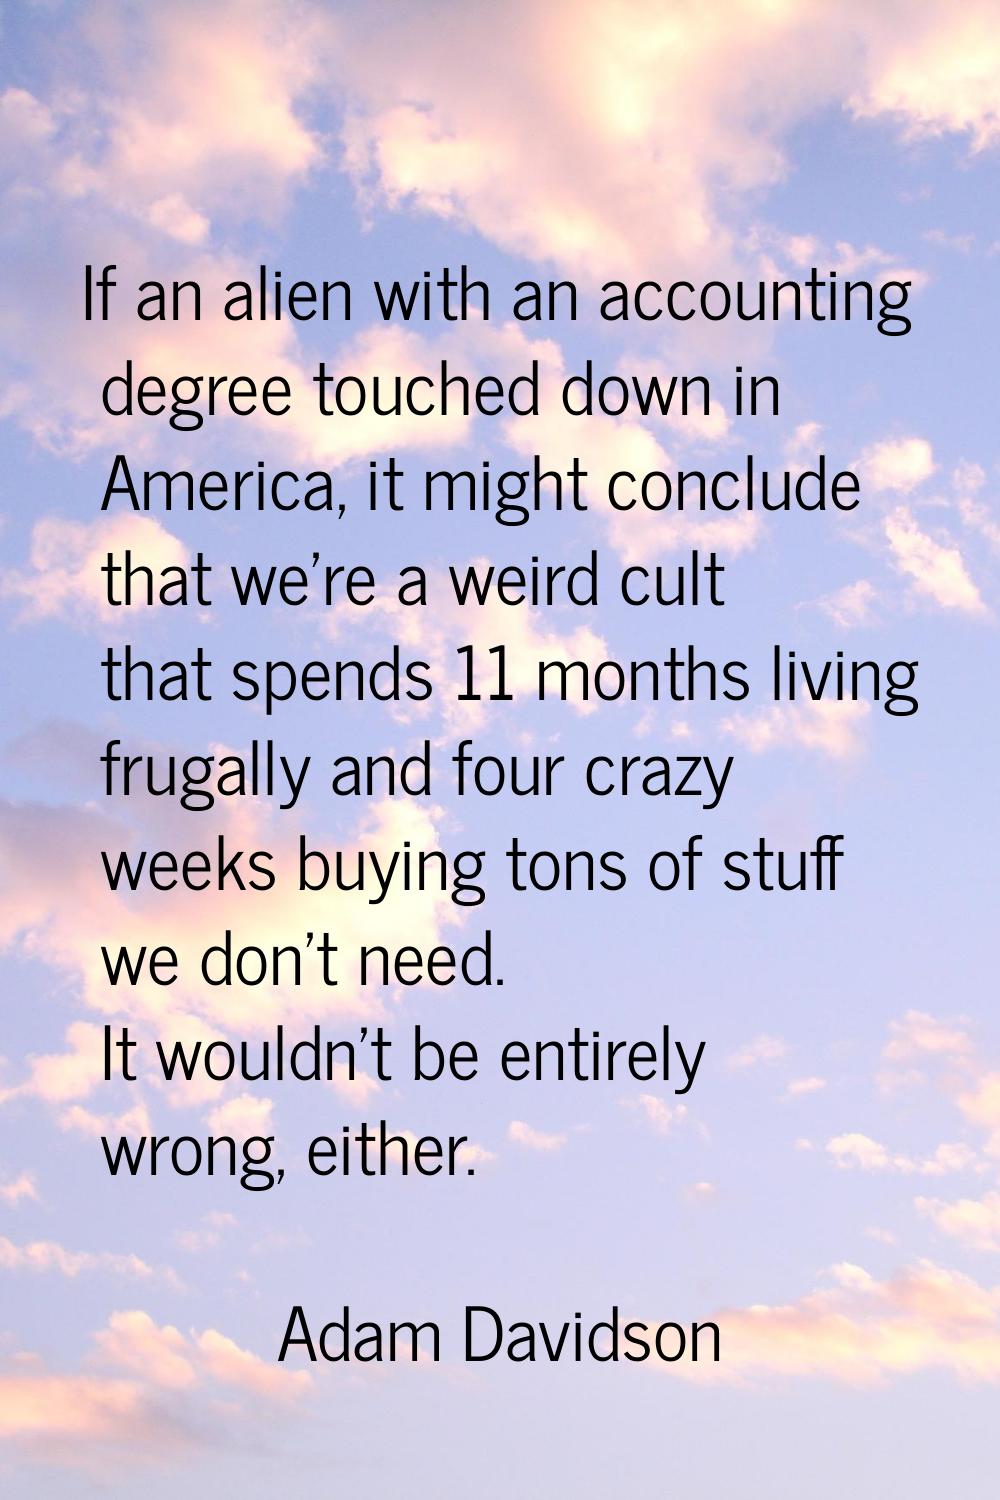 If an alien with an accounting degree touched down in America, it might conclude that we're a weird